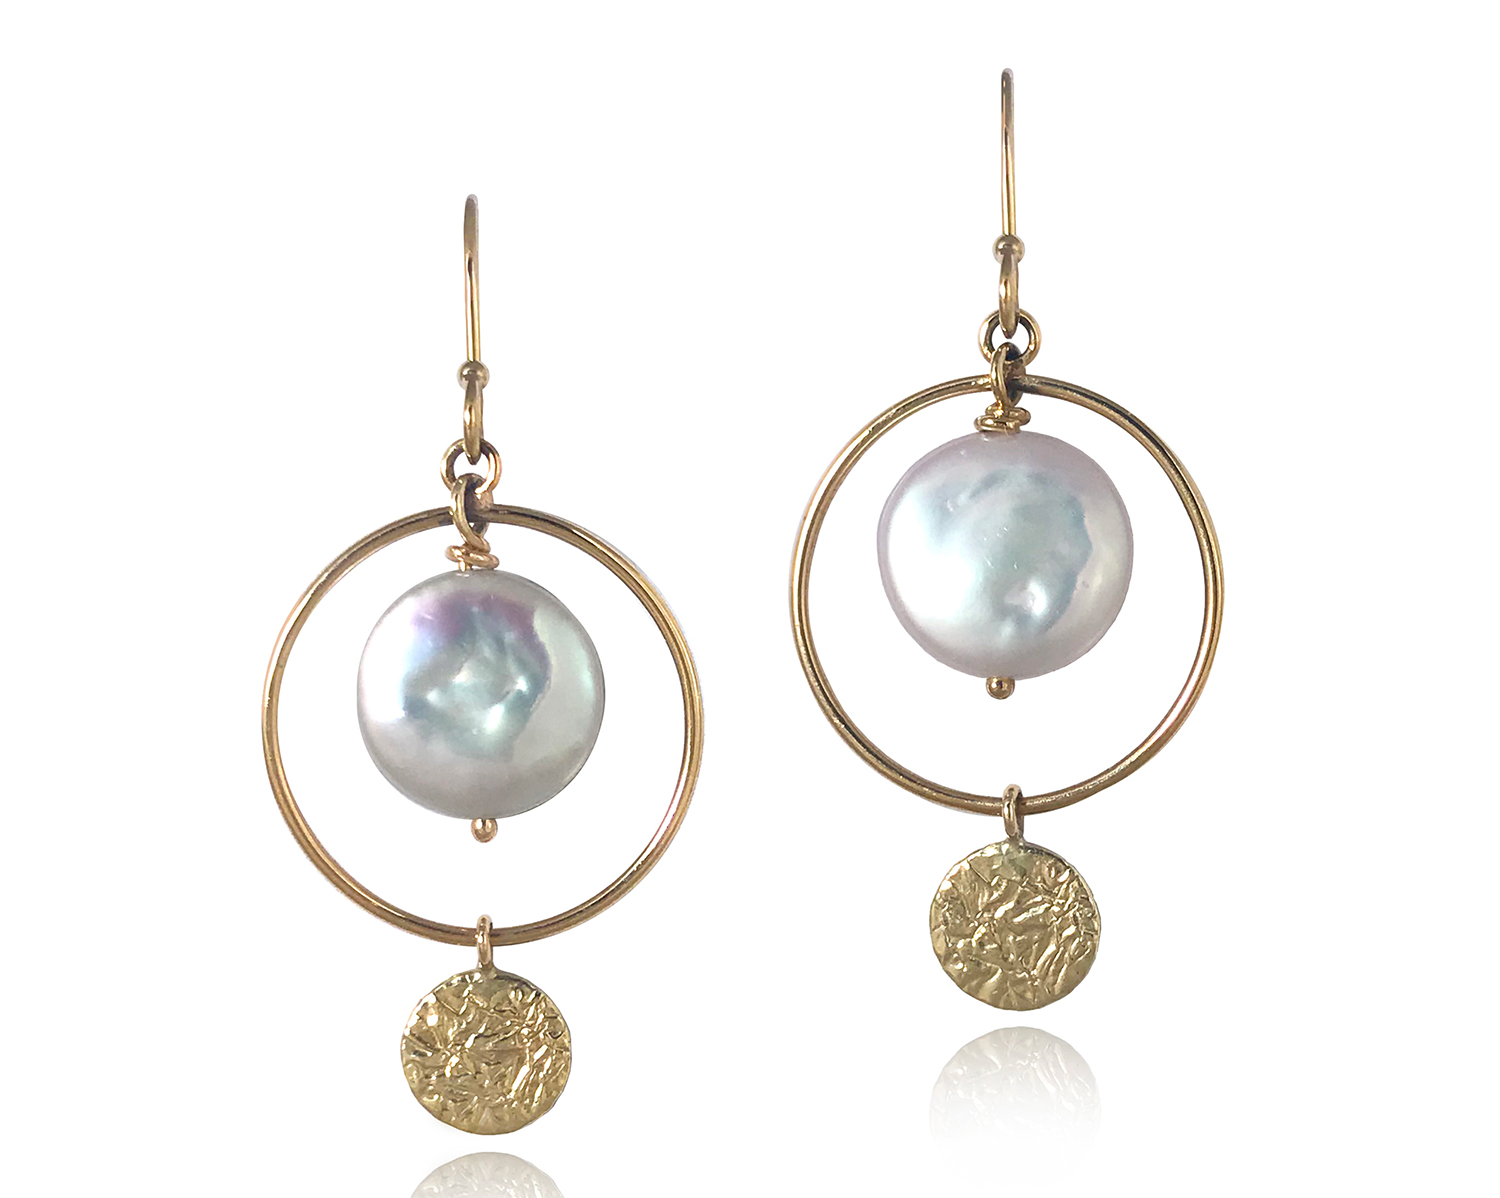 INSTORE Design Awards 2022 &#8211; Pearl Jewelry Under $5,000